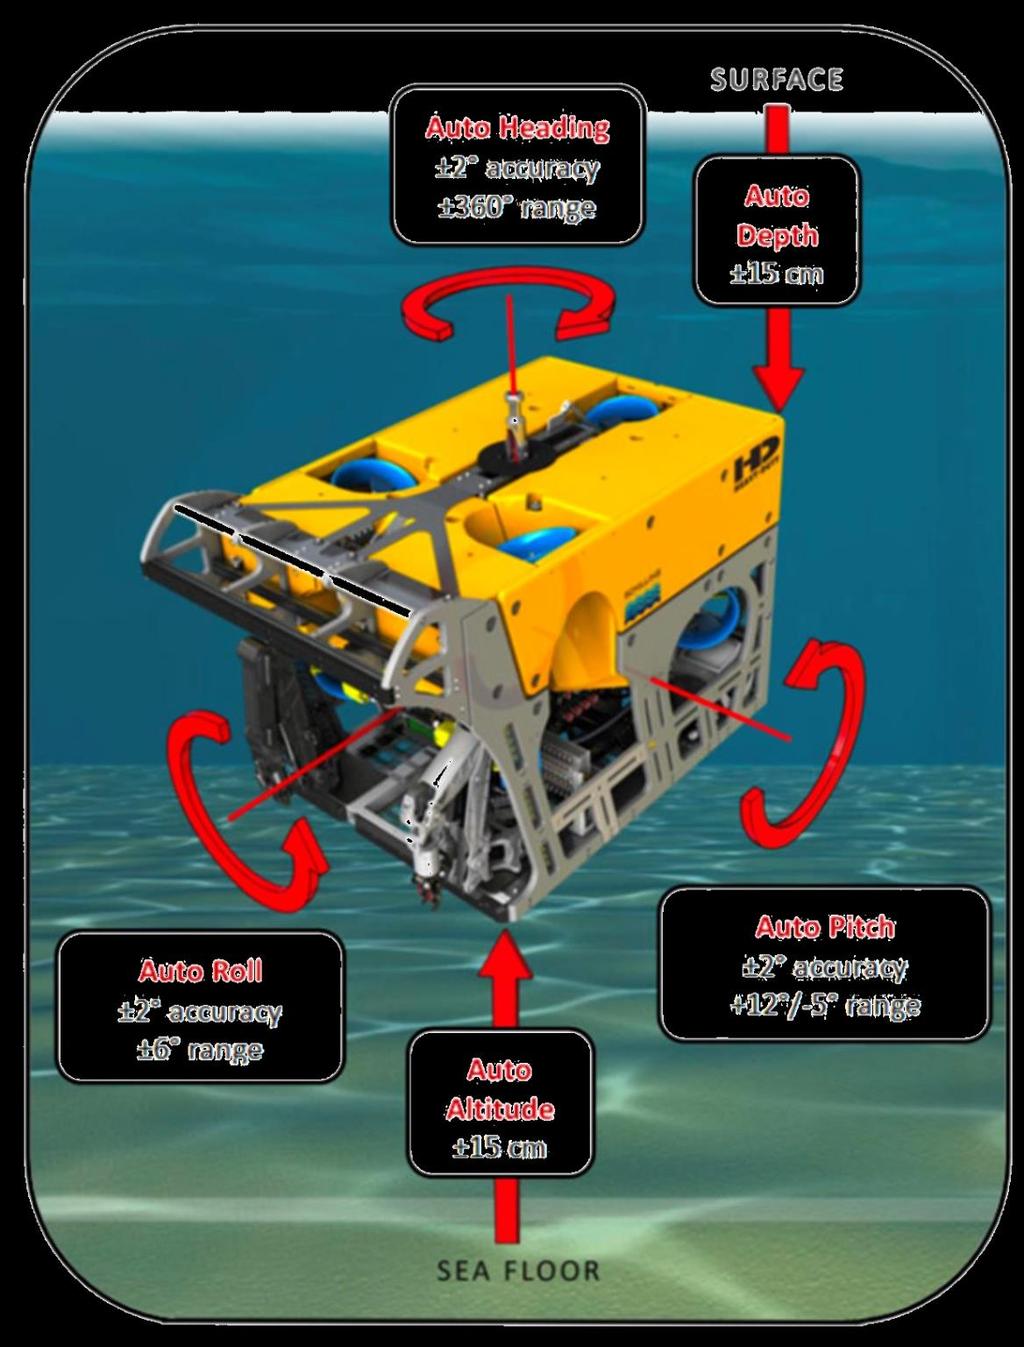 AS WELL AS A HIGHLY CAPABLE ROV.